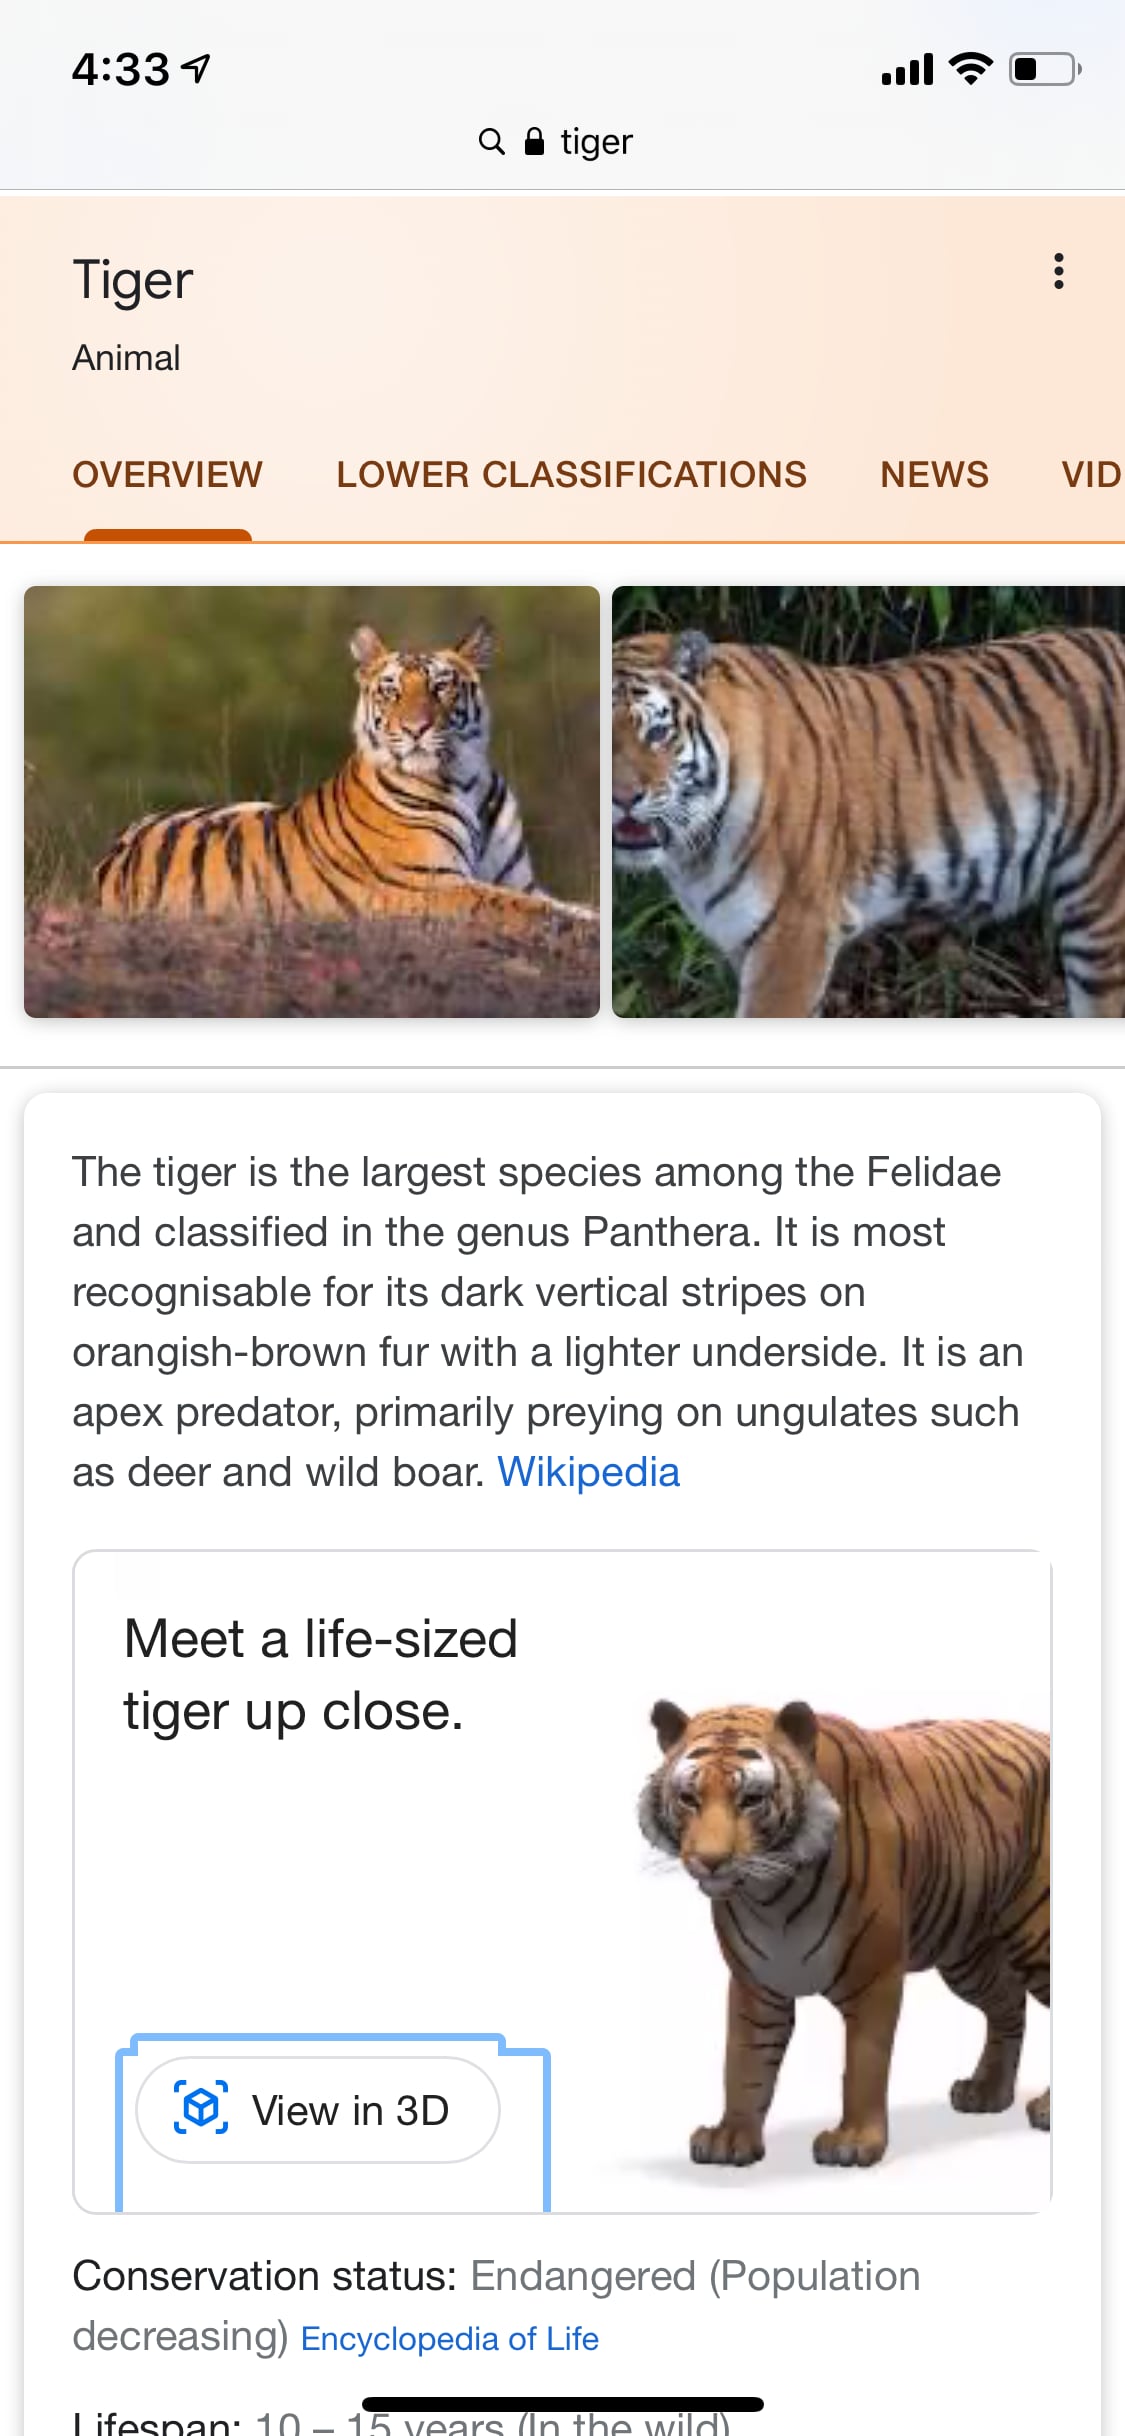 Google 3D animals: how to bring tigers and lions to life in your